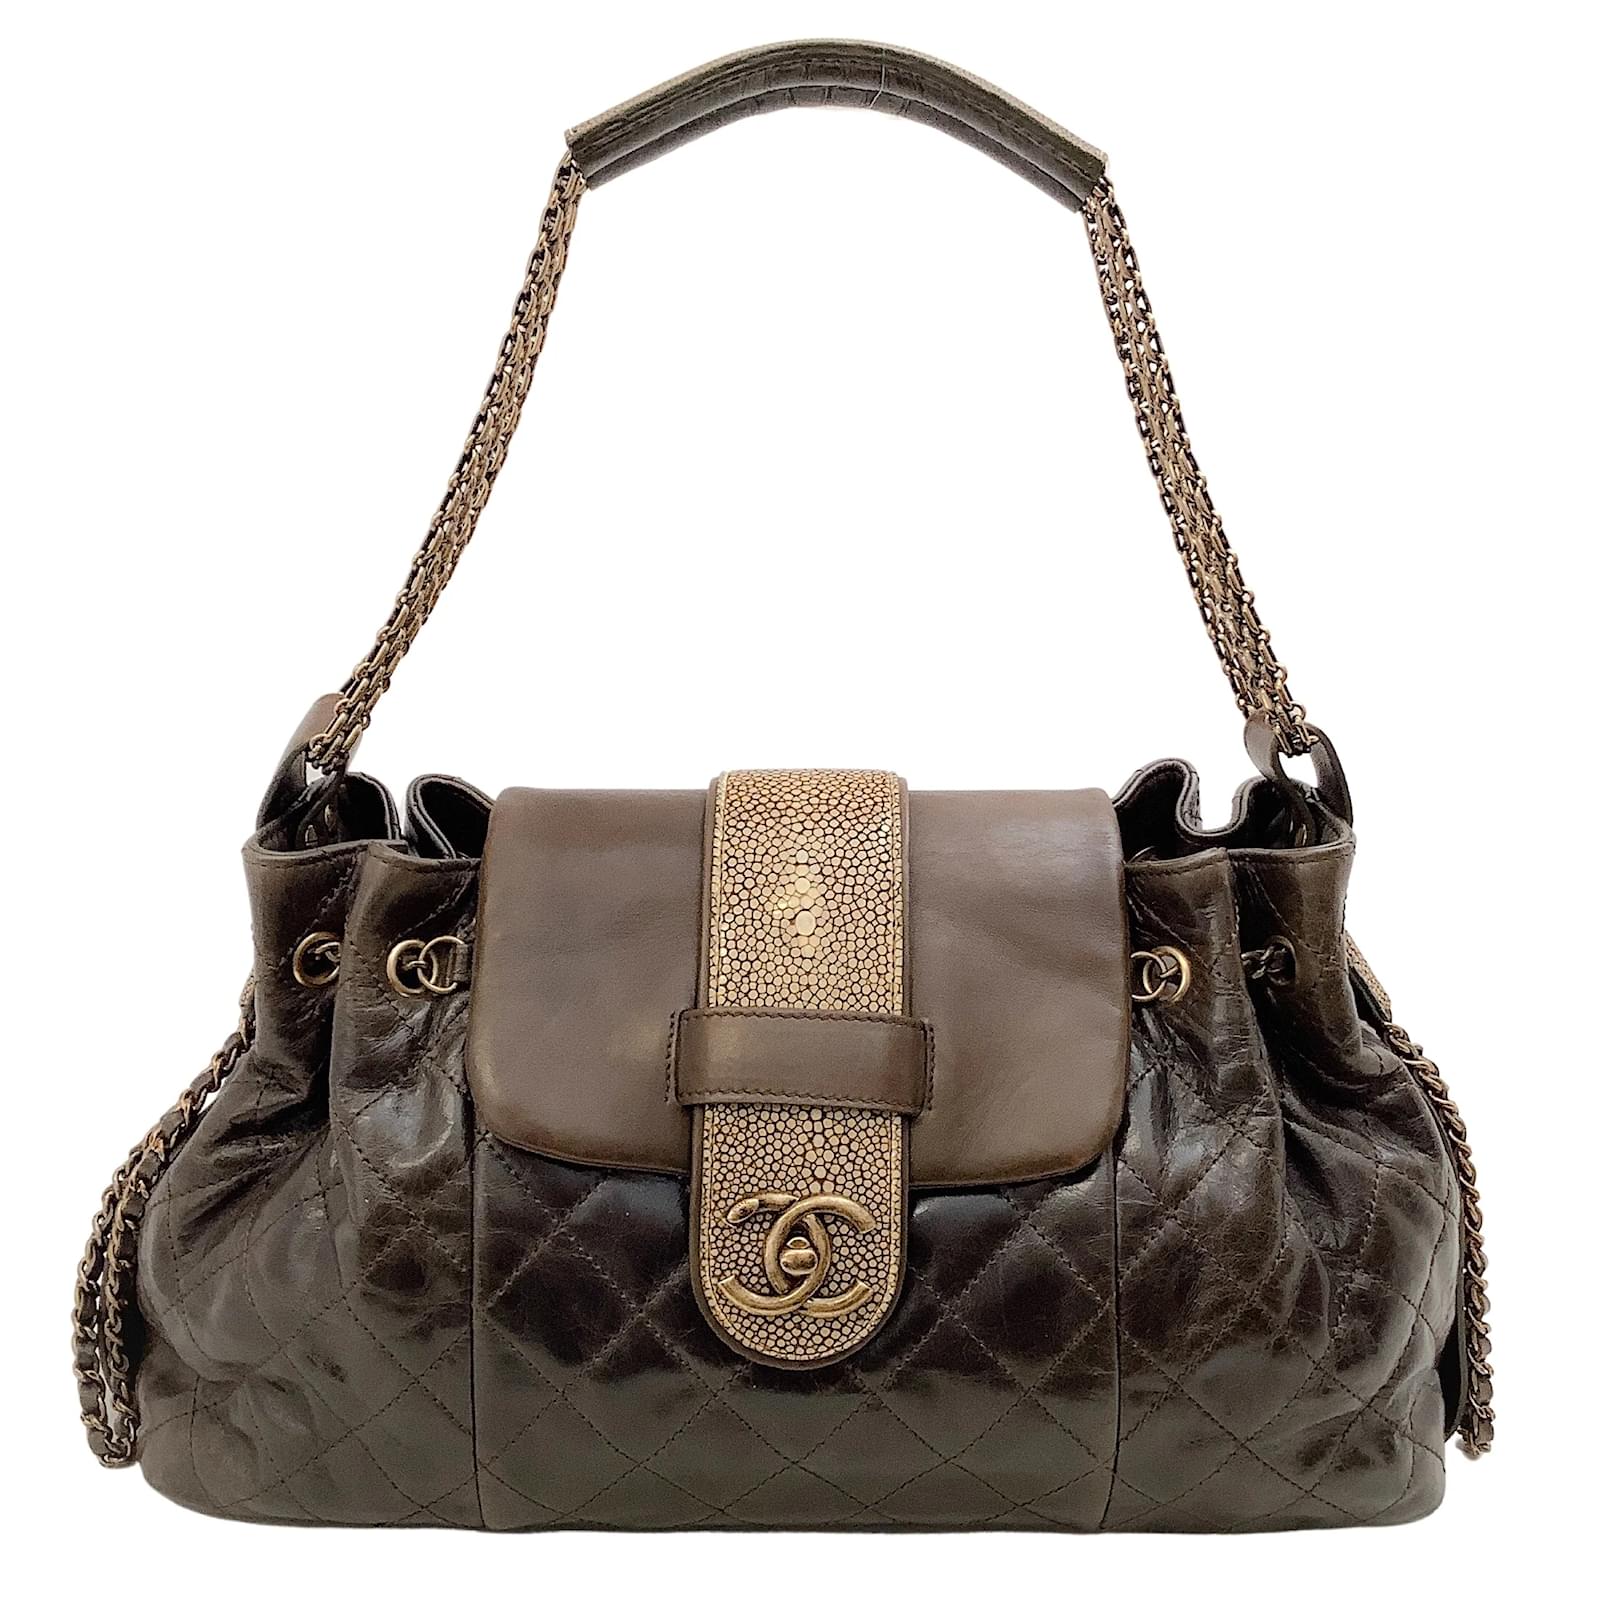 Handbags Chanel Chanel Brown Leather Quilted Bindi Shoulder Bag with Stingray Flap